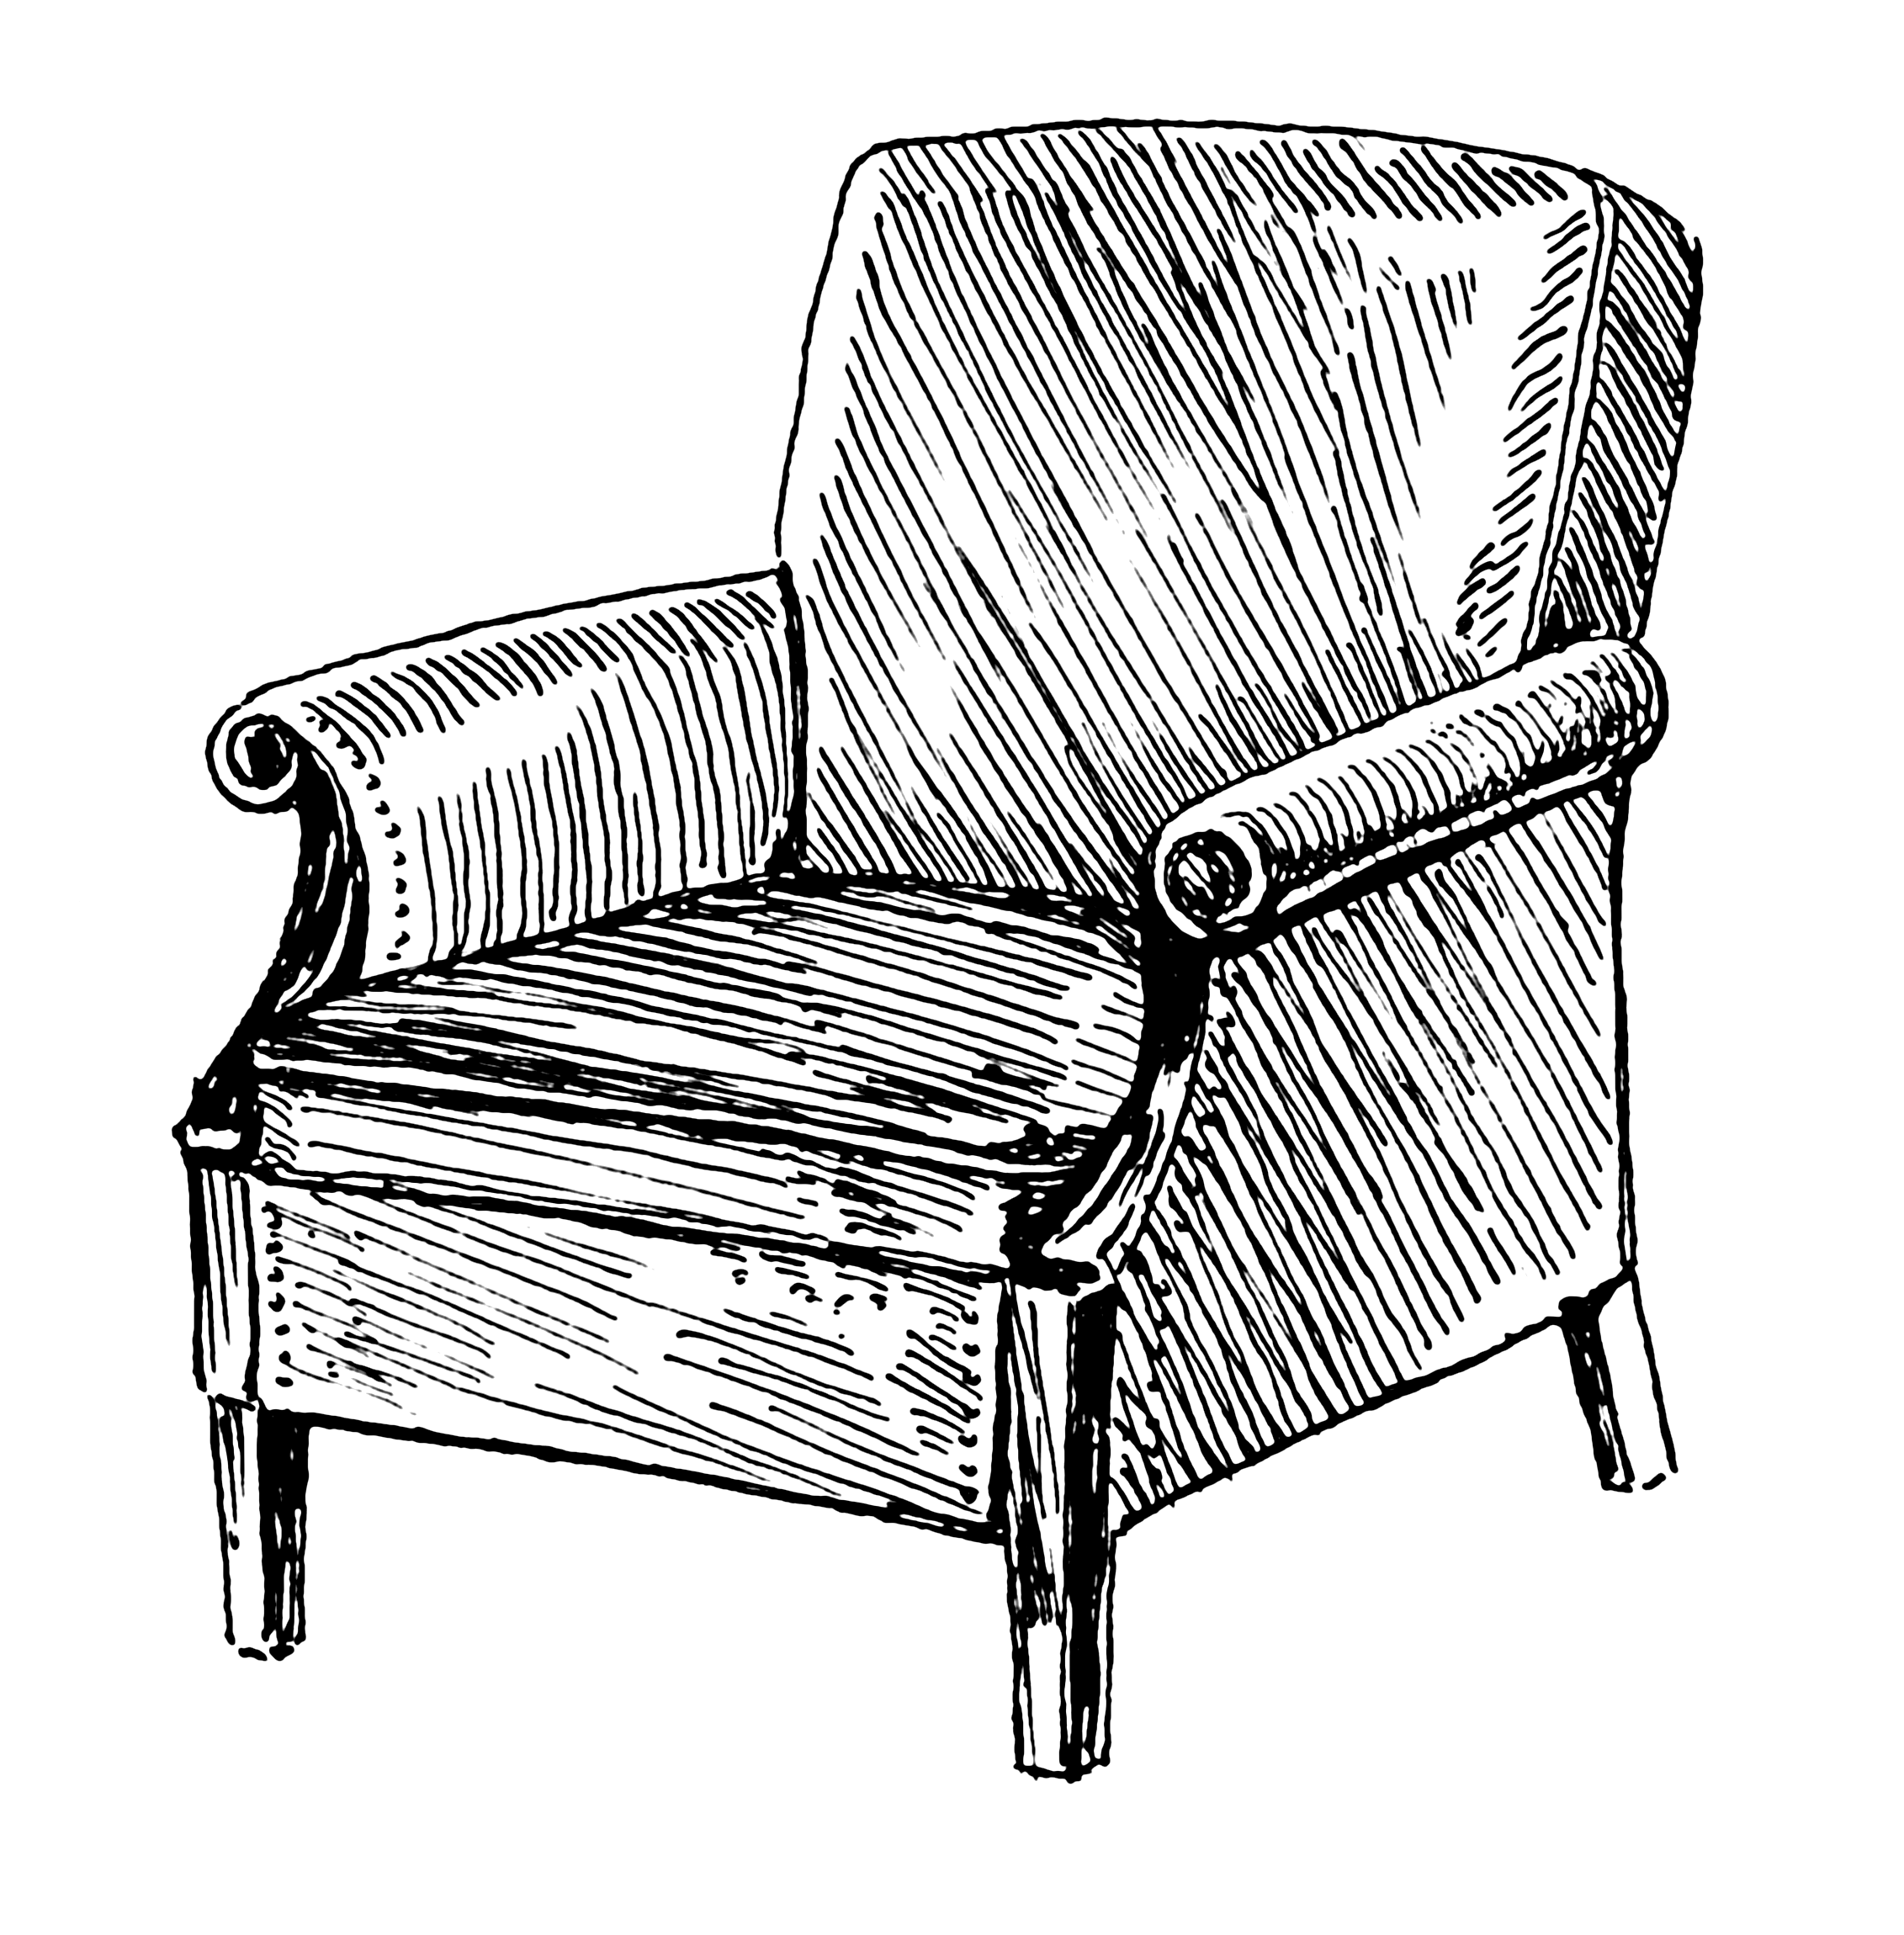 File:Armchair (PSF).png - Wikimedia Commons